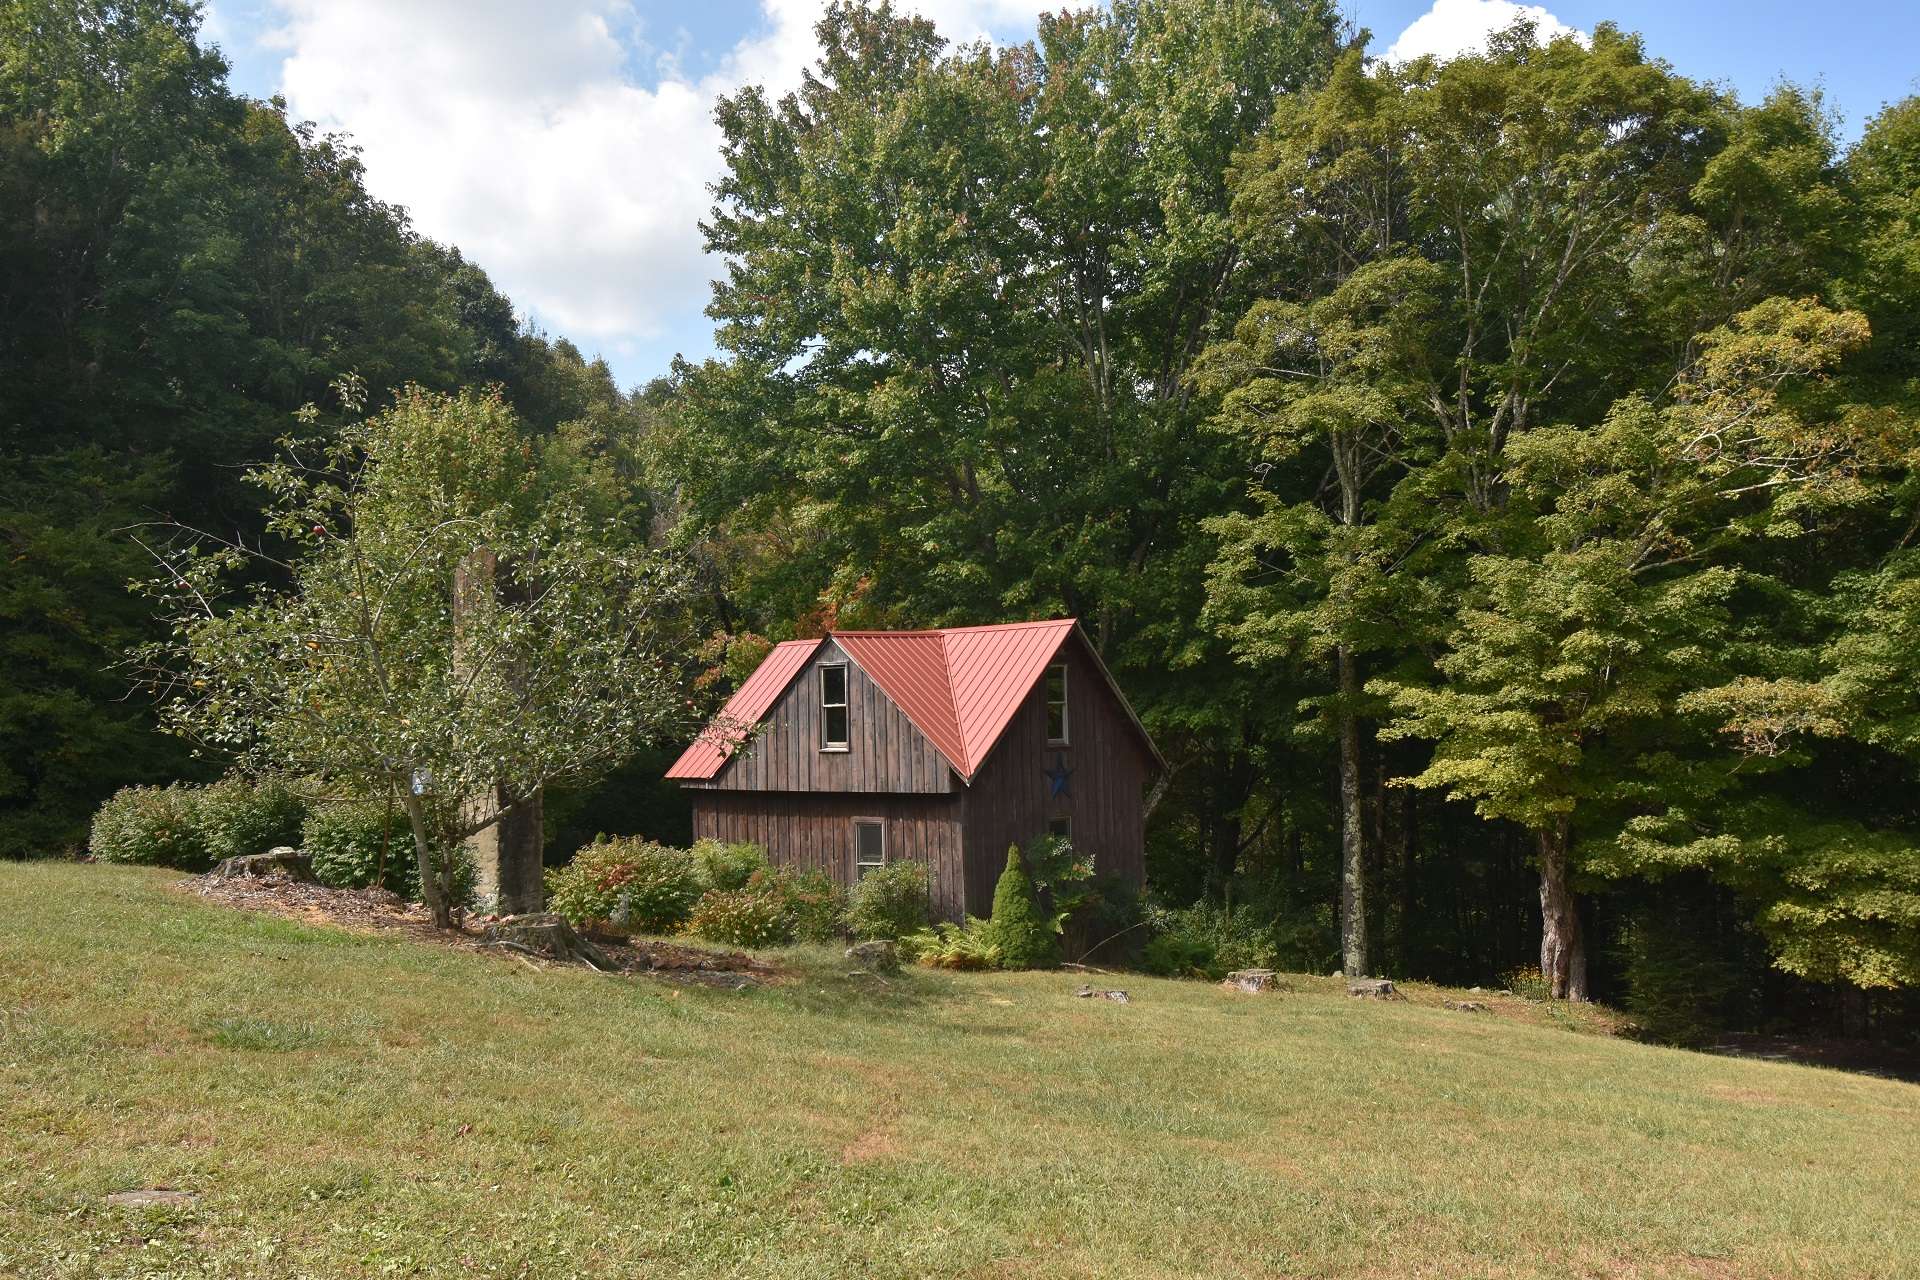 The property includes this awesome outbuilding that was once the old homeplace.